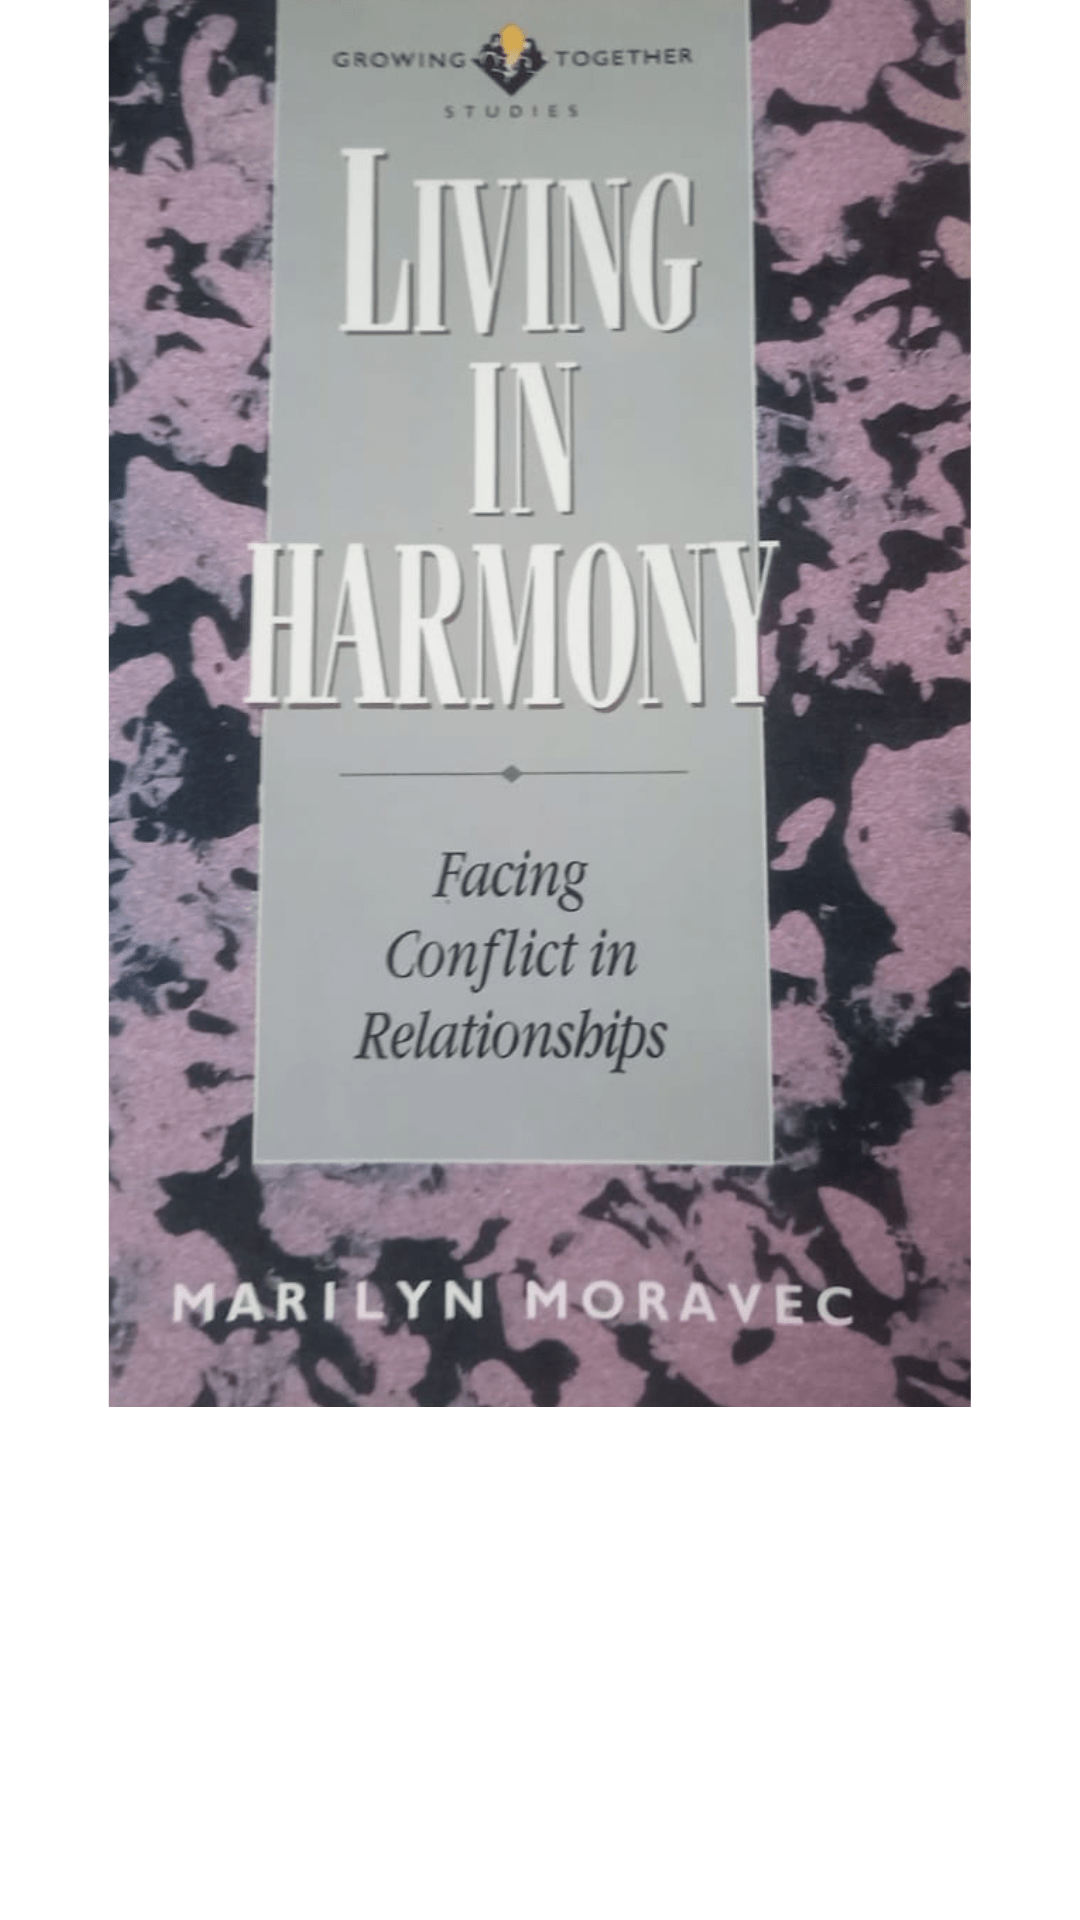 Living in Harmony: Facing Conflict in Relationships